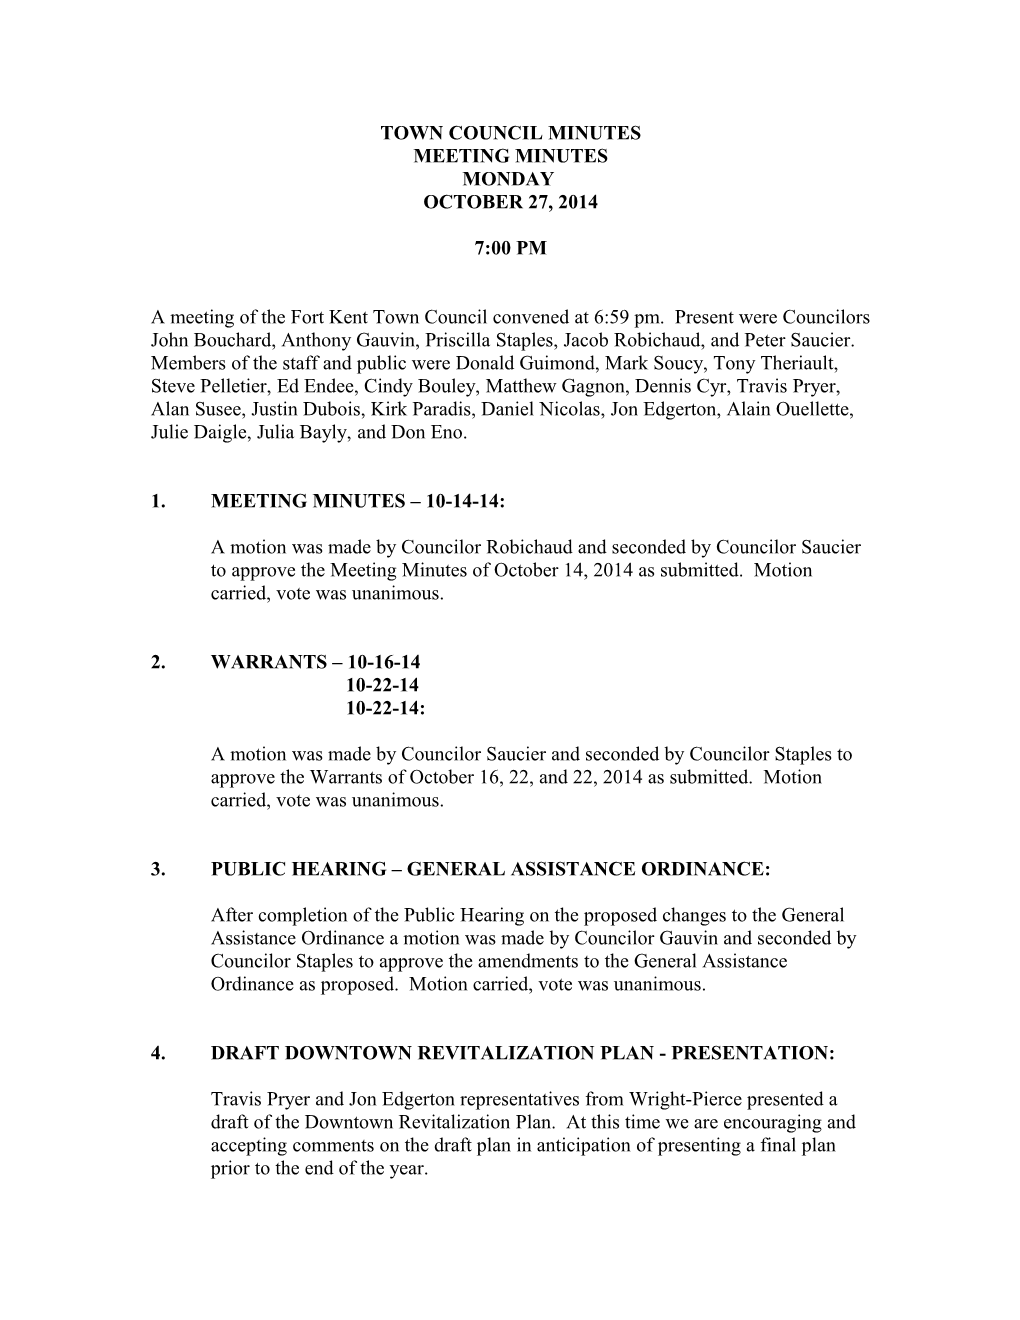 Town Council Minutes s3